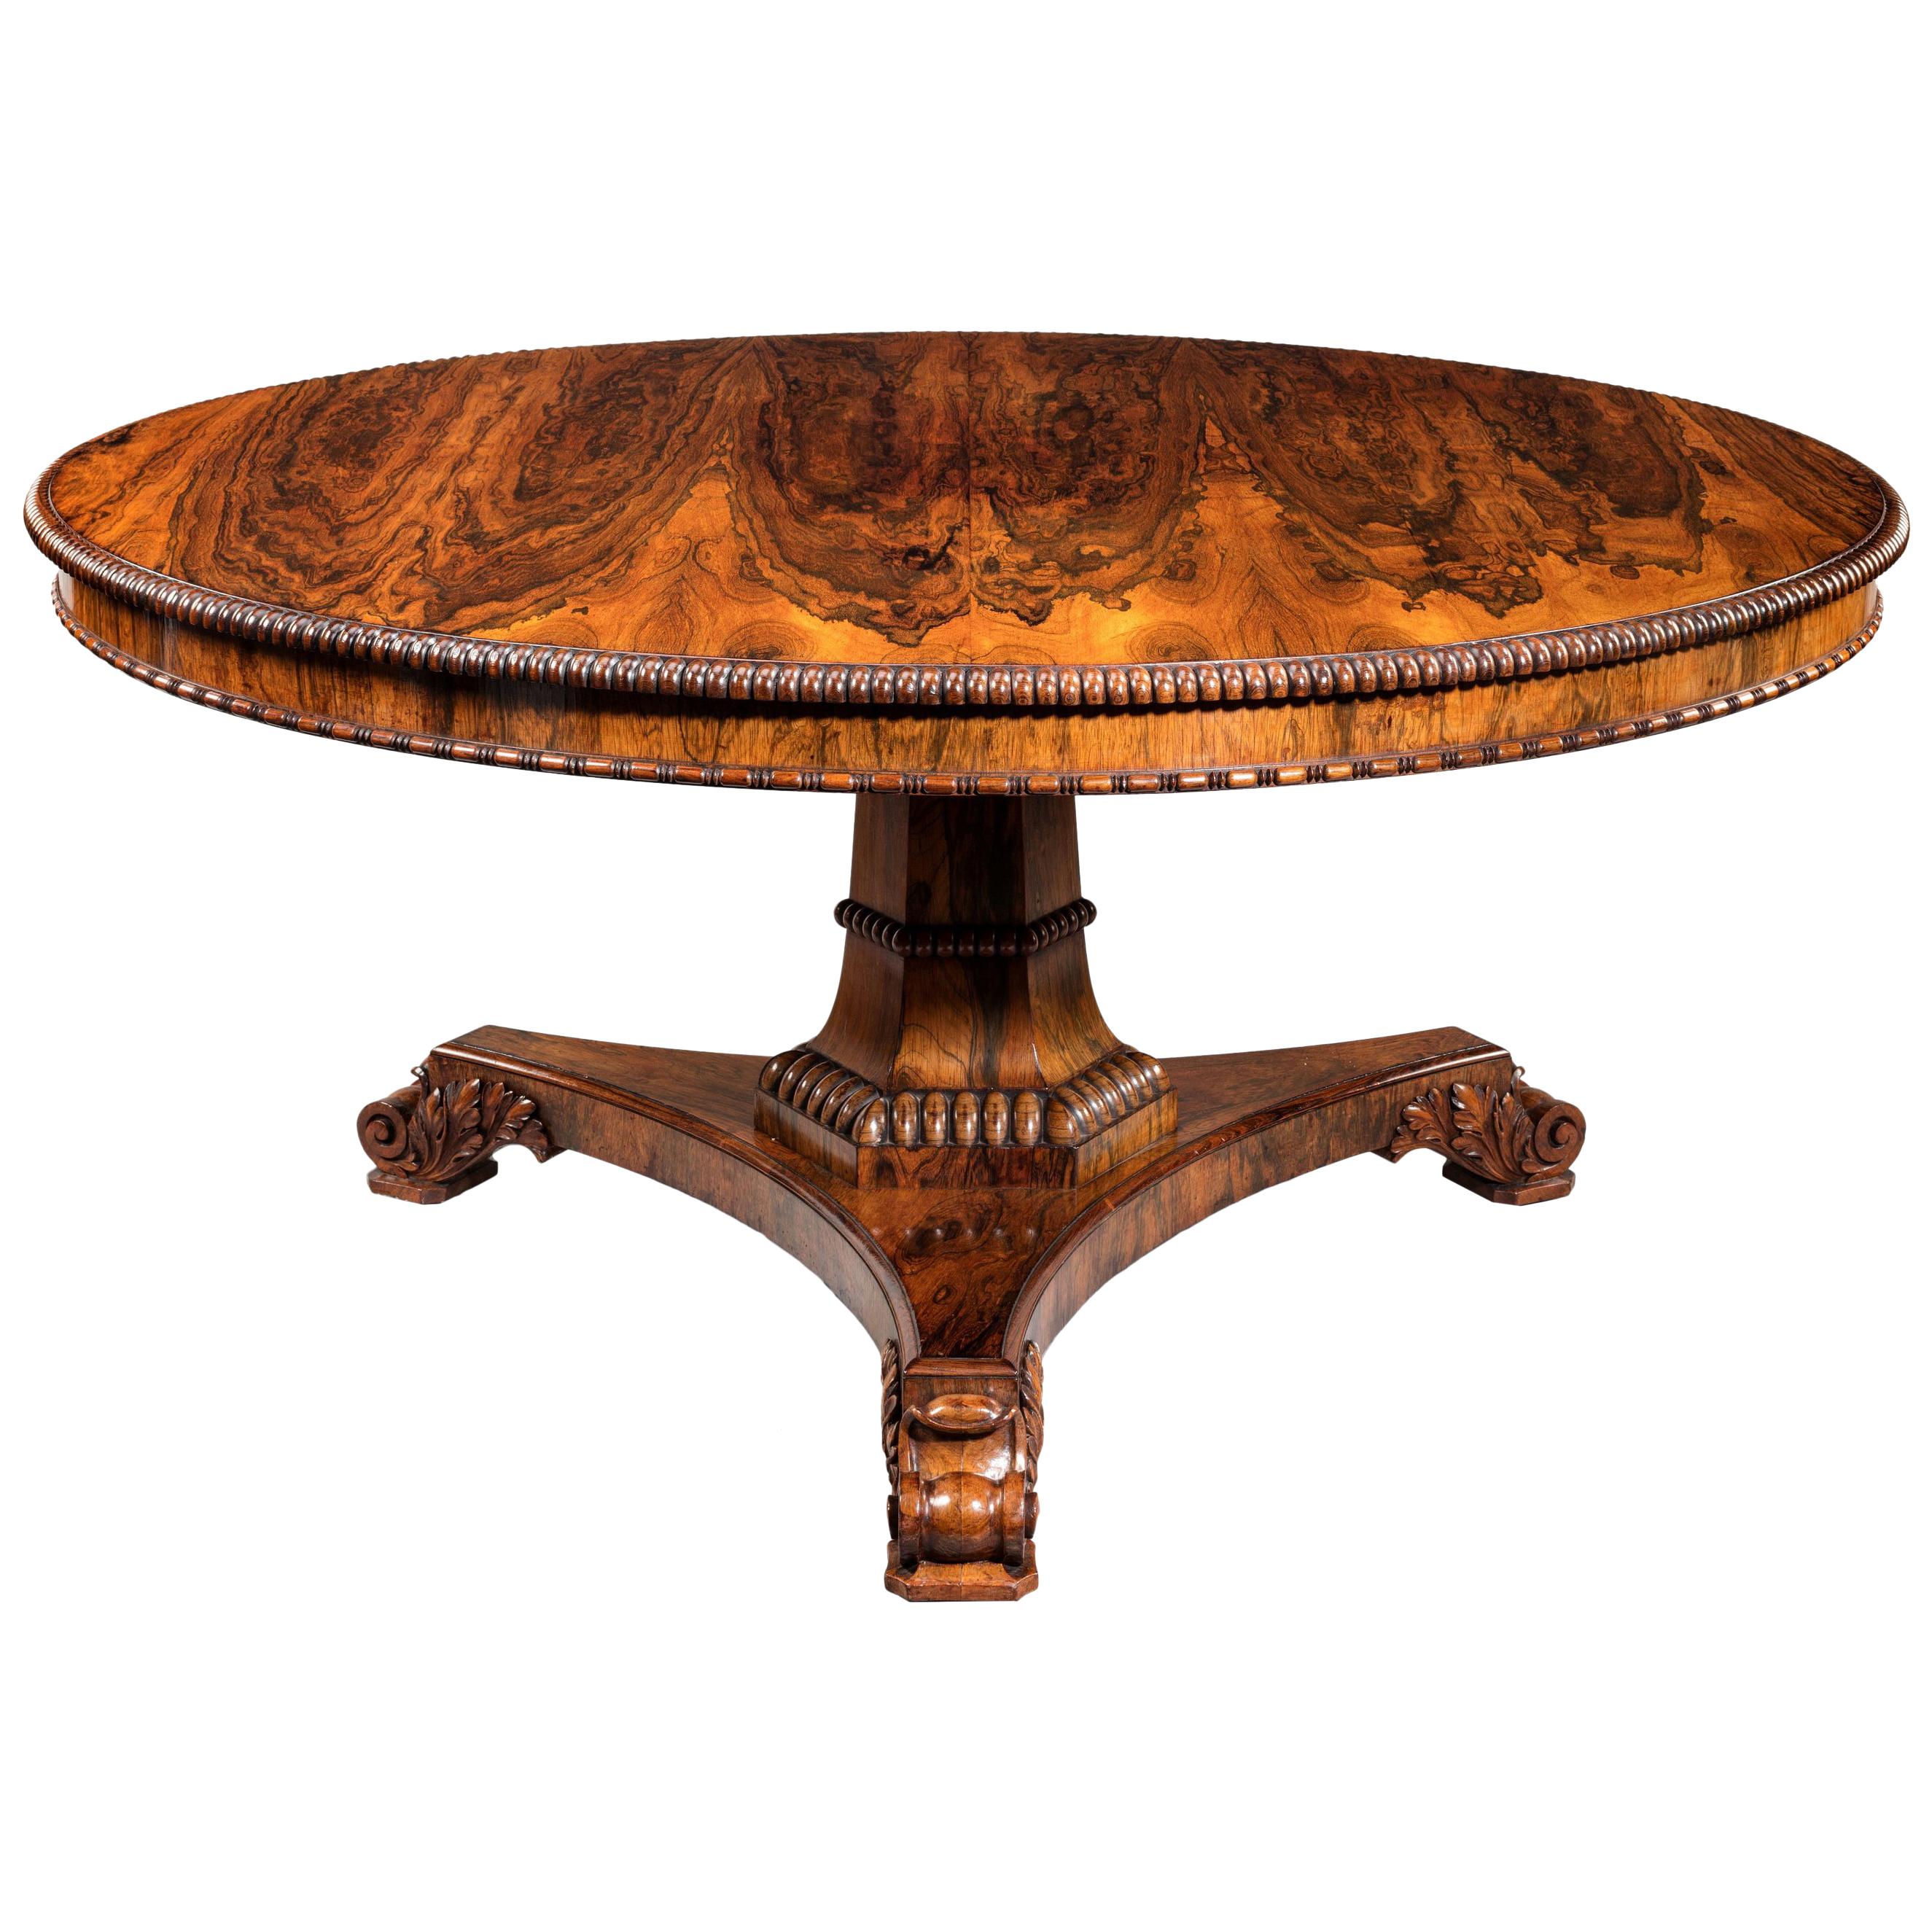 A fine late Regency centre table attributed to Gillows Circa 1825